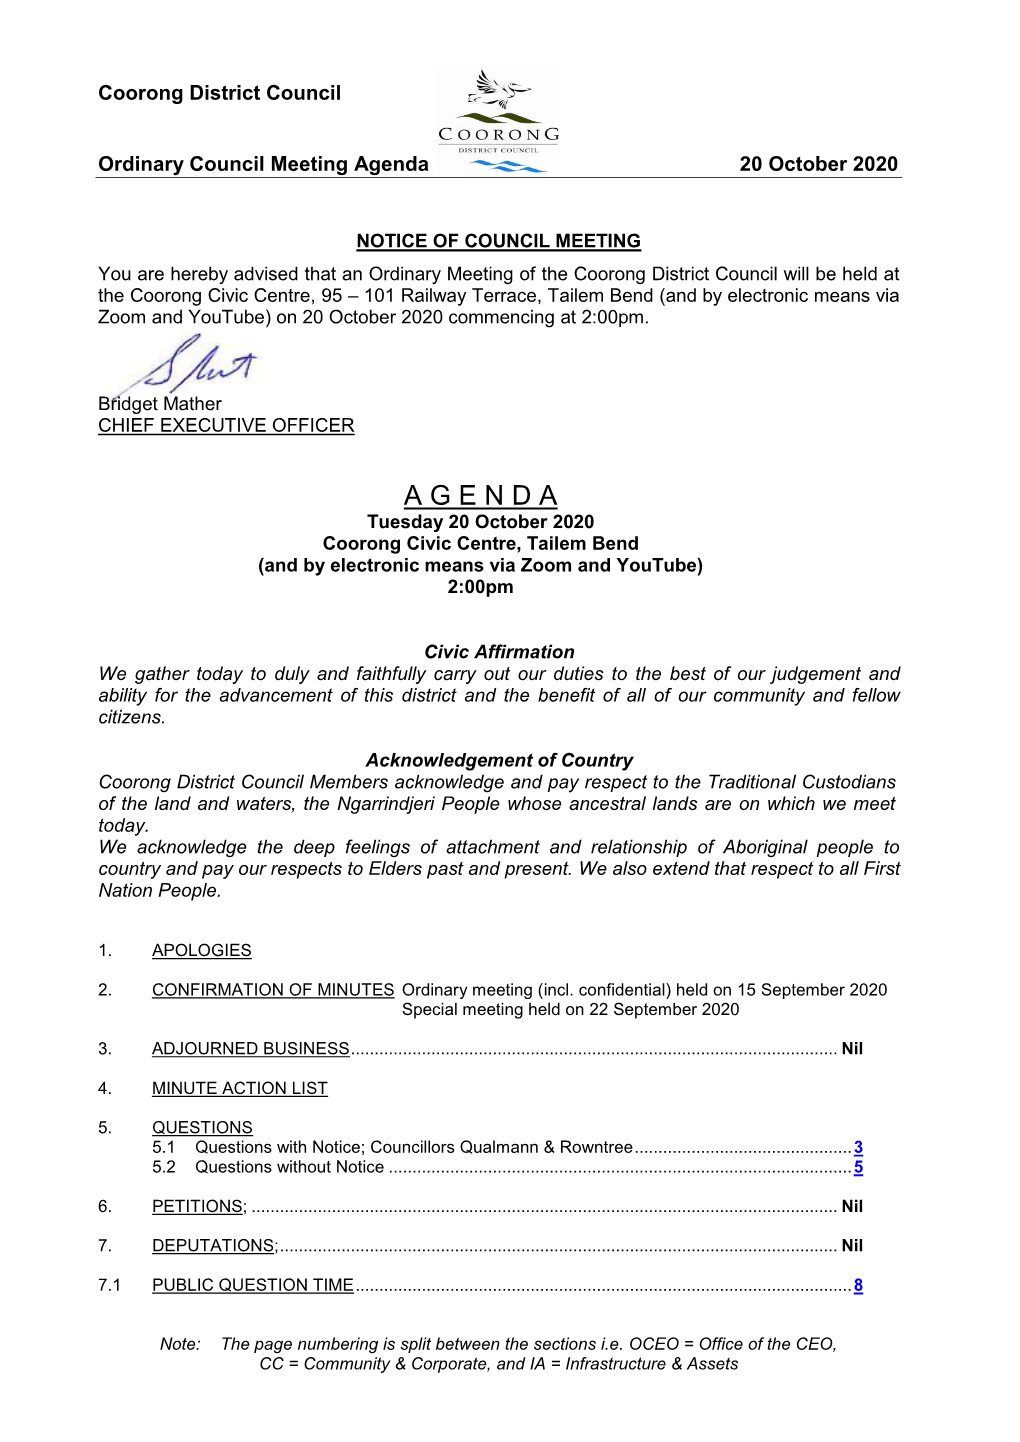 Notice of Council Meeting